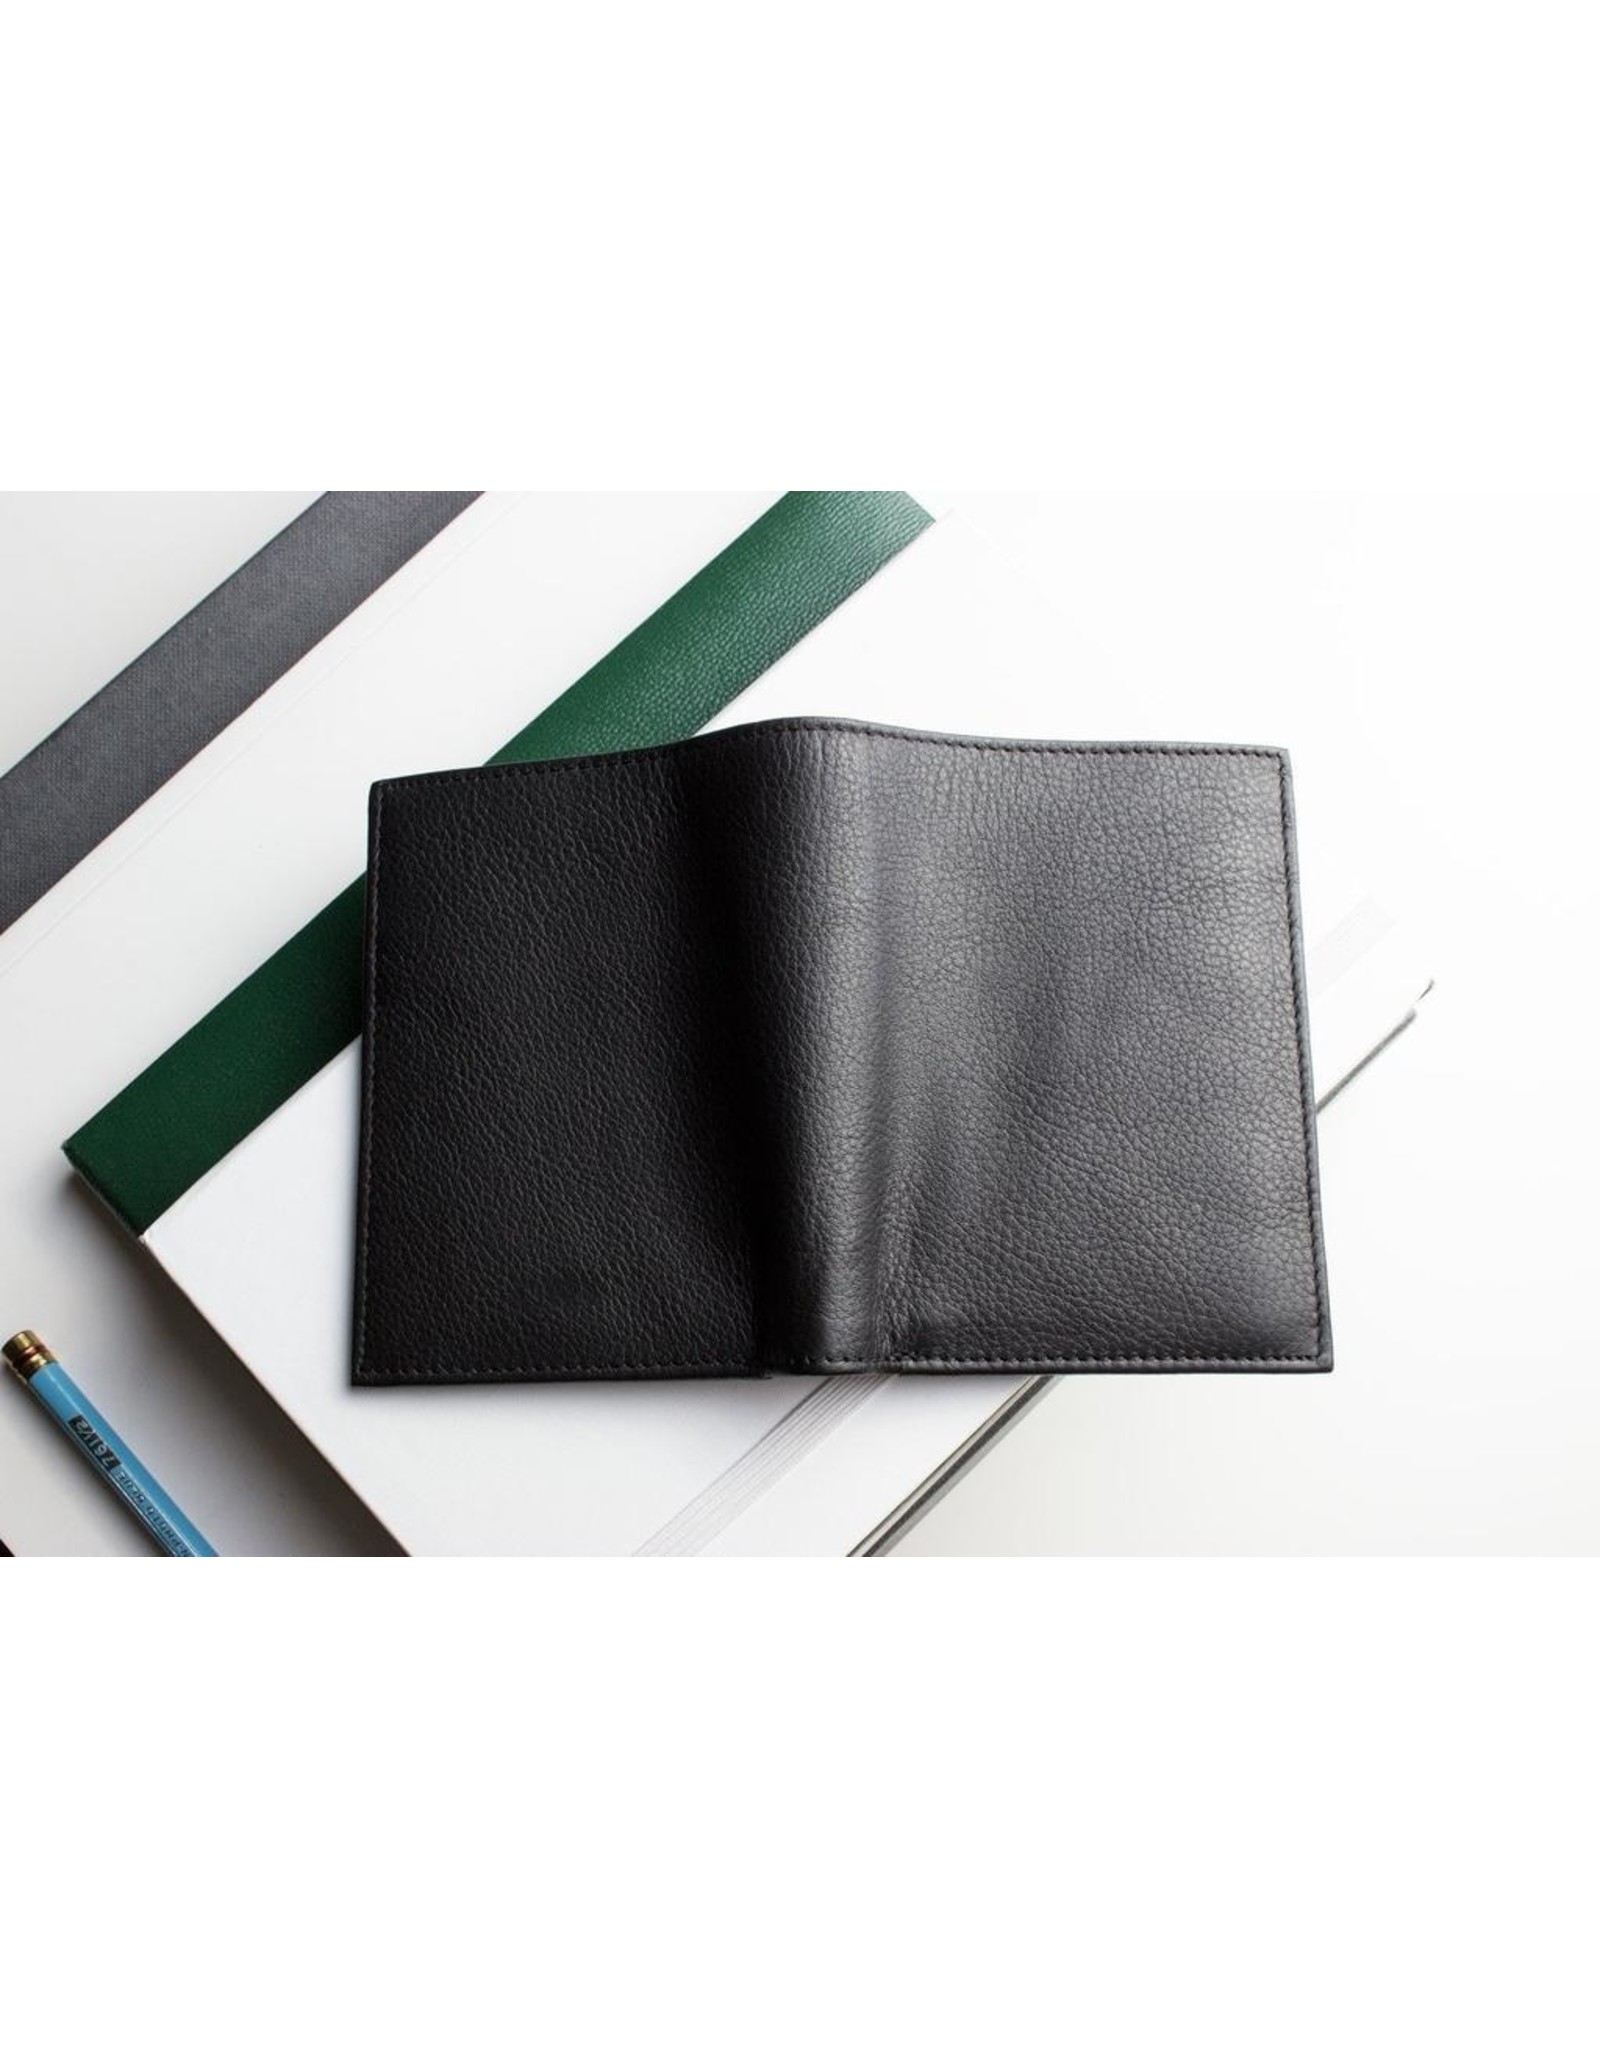 Kiko Leather Slimfold Passcase Leather Wallet In Black - Digs N Gifts